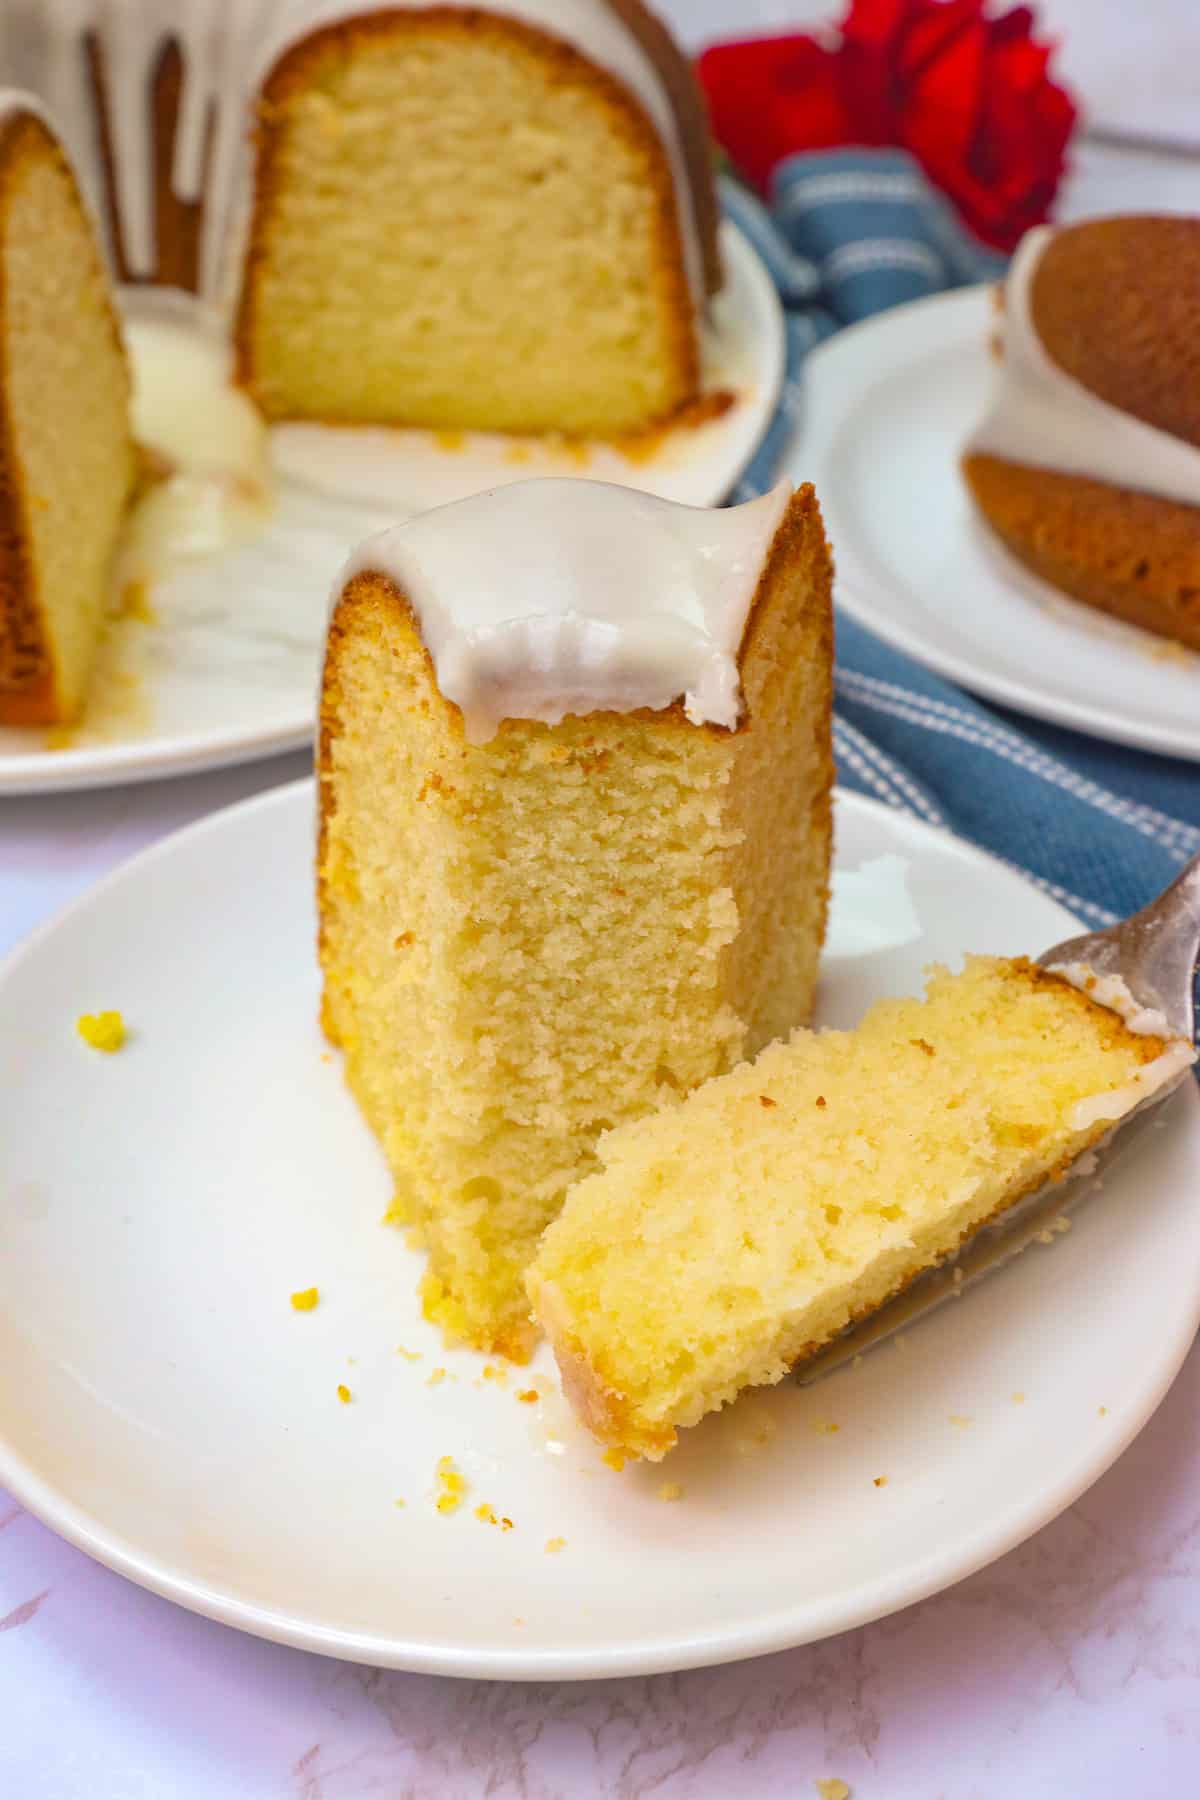 Digging into an insanely good slice of buttermilk pound cake